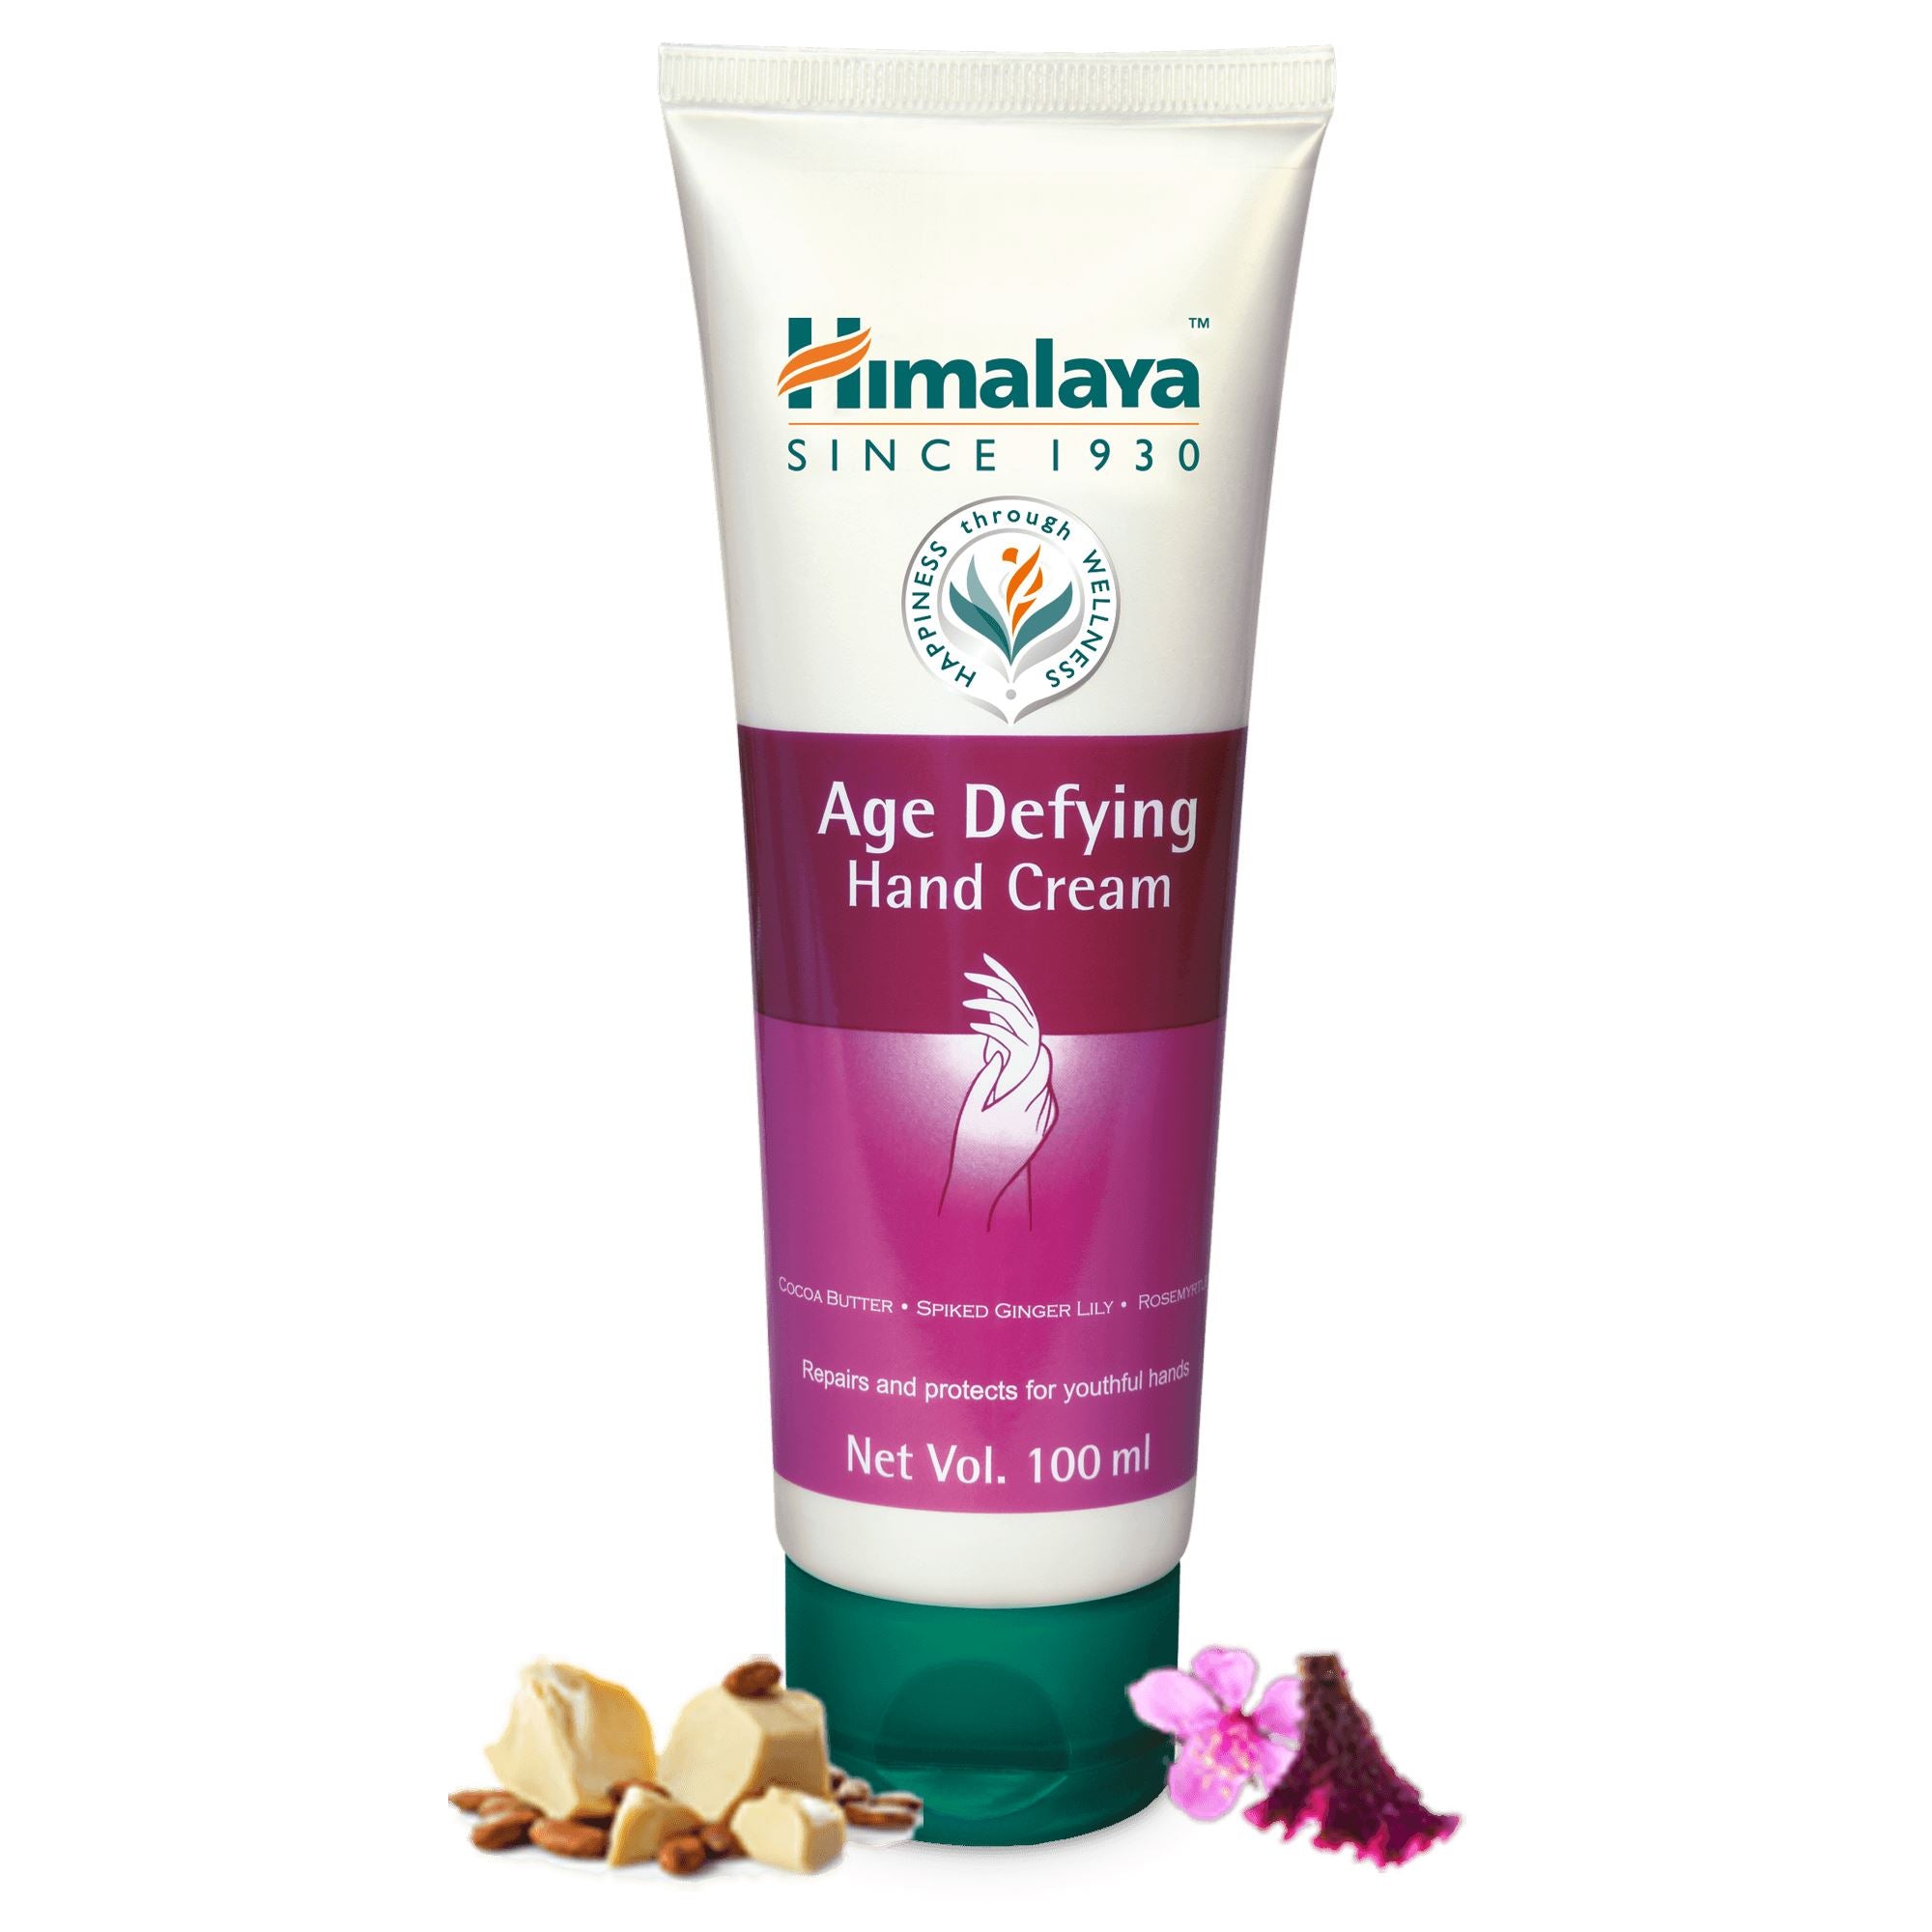 Himalaya Age Defying Hand Cream 100ml - Repairs and protects for youthful hands